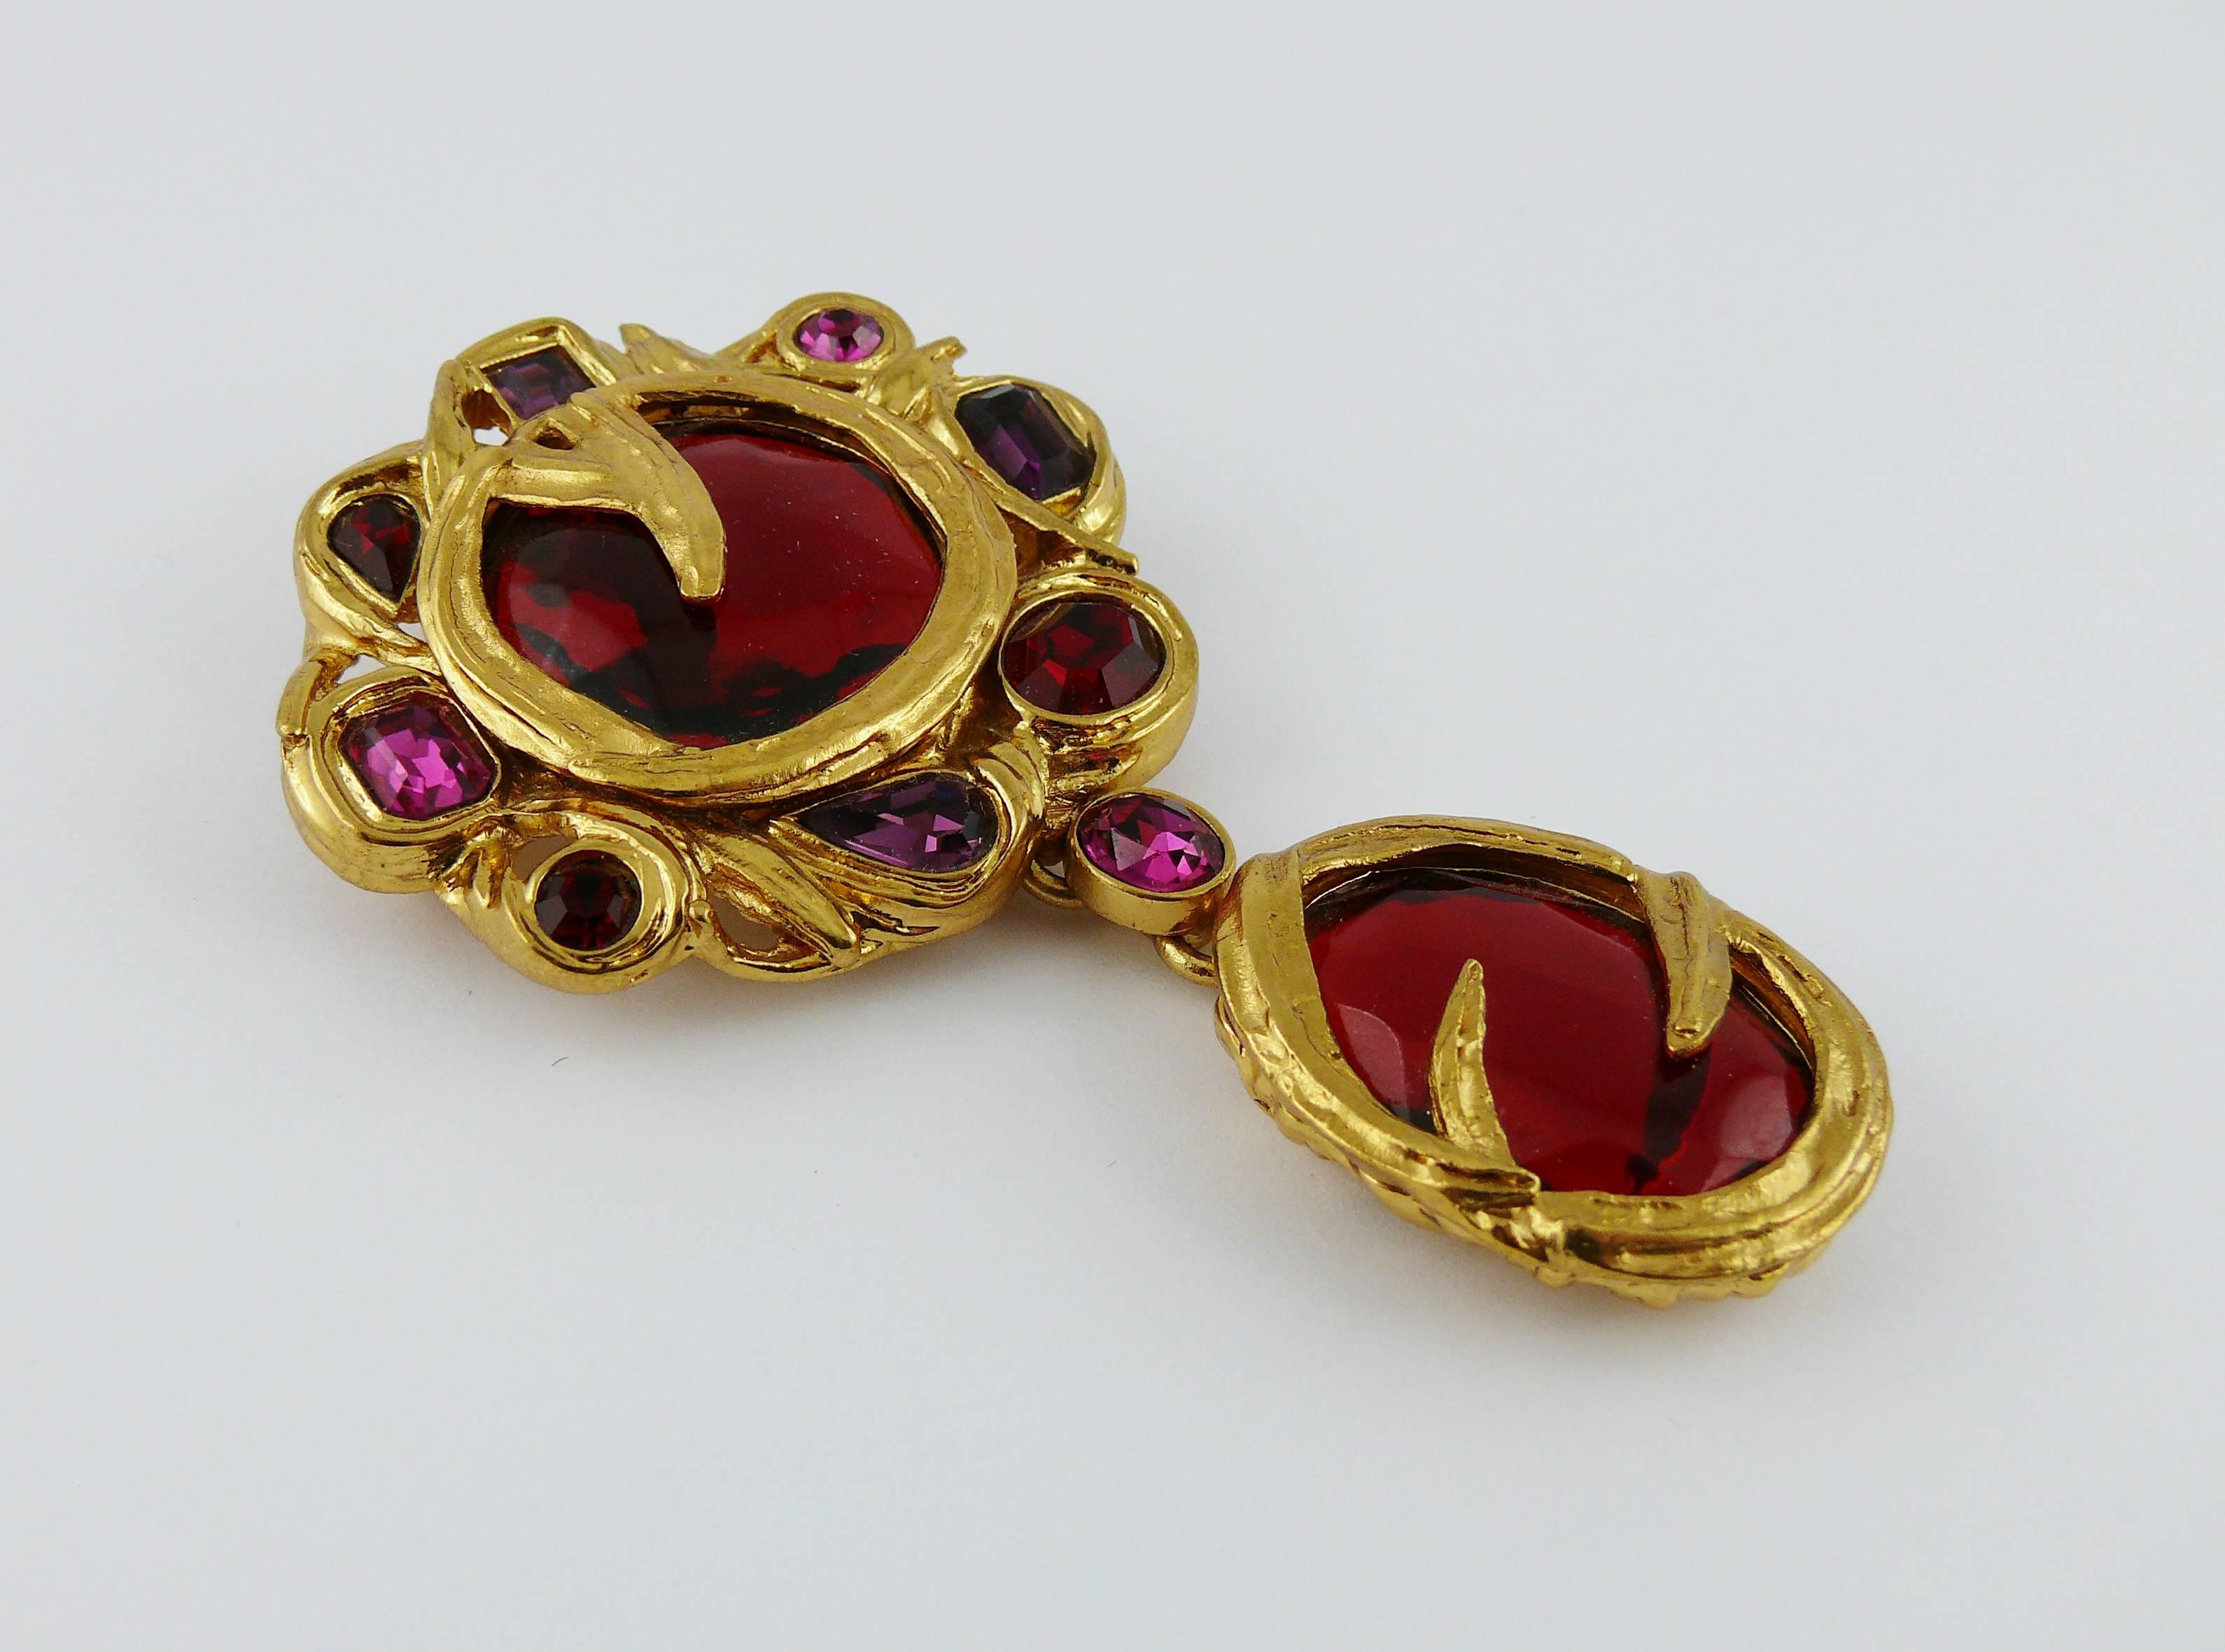 YVES SAINT LAURENT vintage massive brooch featuring multicolored resin cabochons and crystals in a gold toned setting.

Can be worn as a pendant.

Embossed YSL Made in France.

Indicative measurements : length approx. 9.4 cm (3.70 inches) / max.